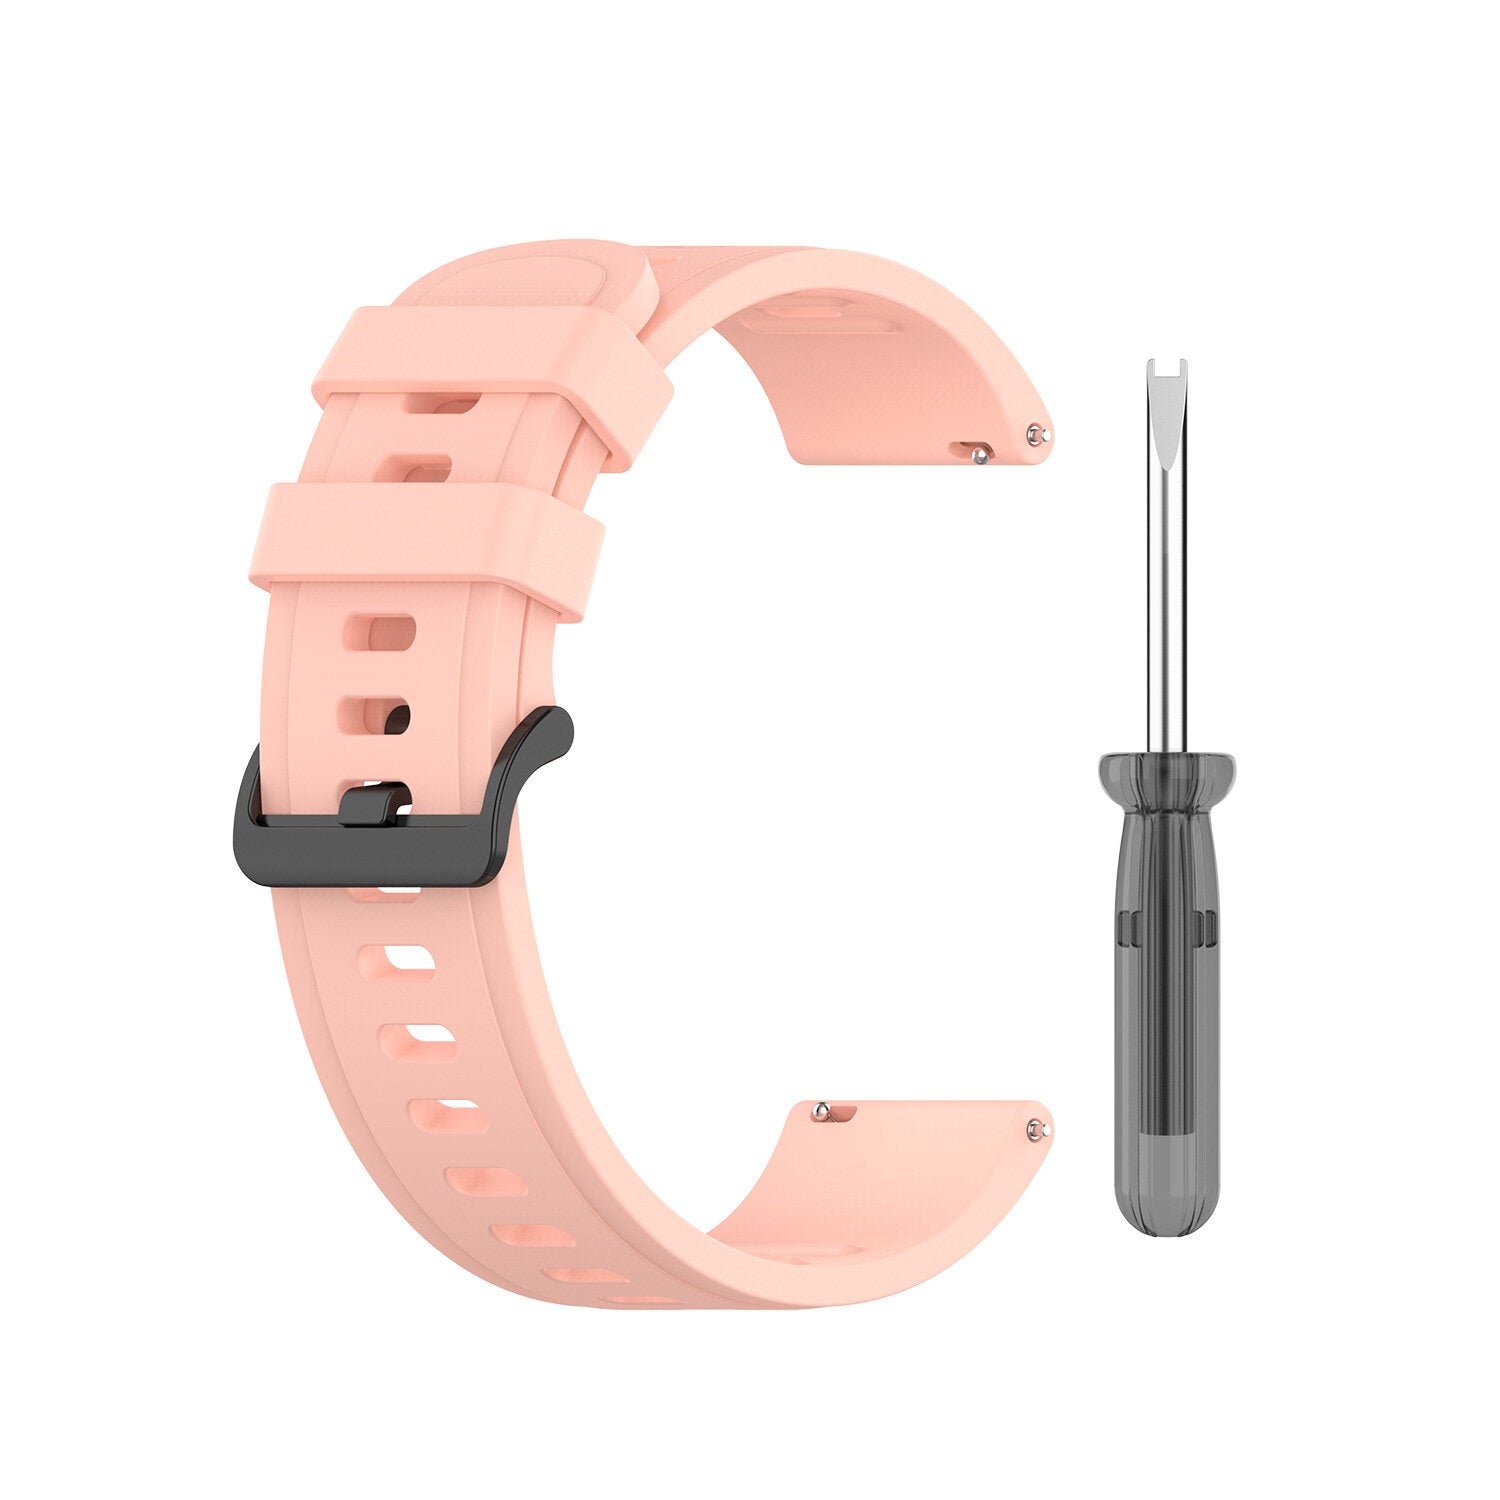 Bakeey Colorful Silicone Watch Strap with Adjust Tool for Amazfit NEO Smart Watch